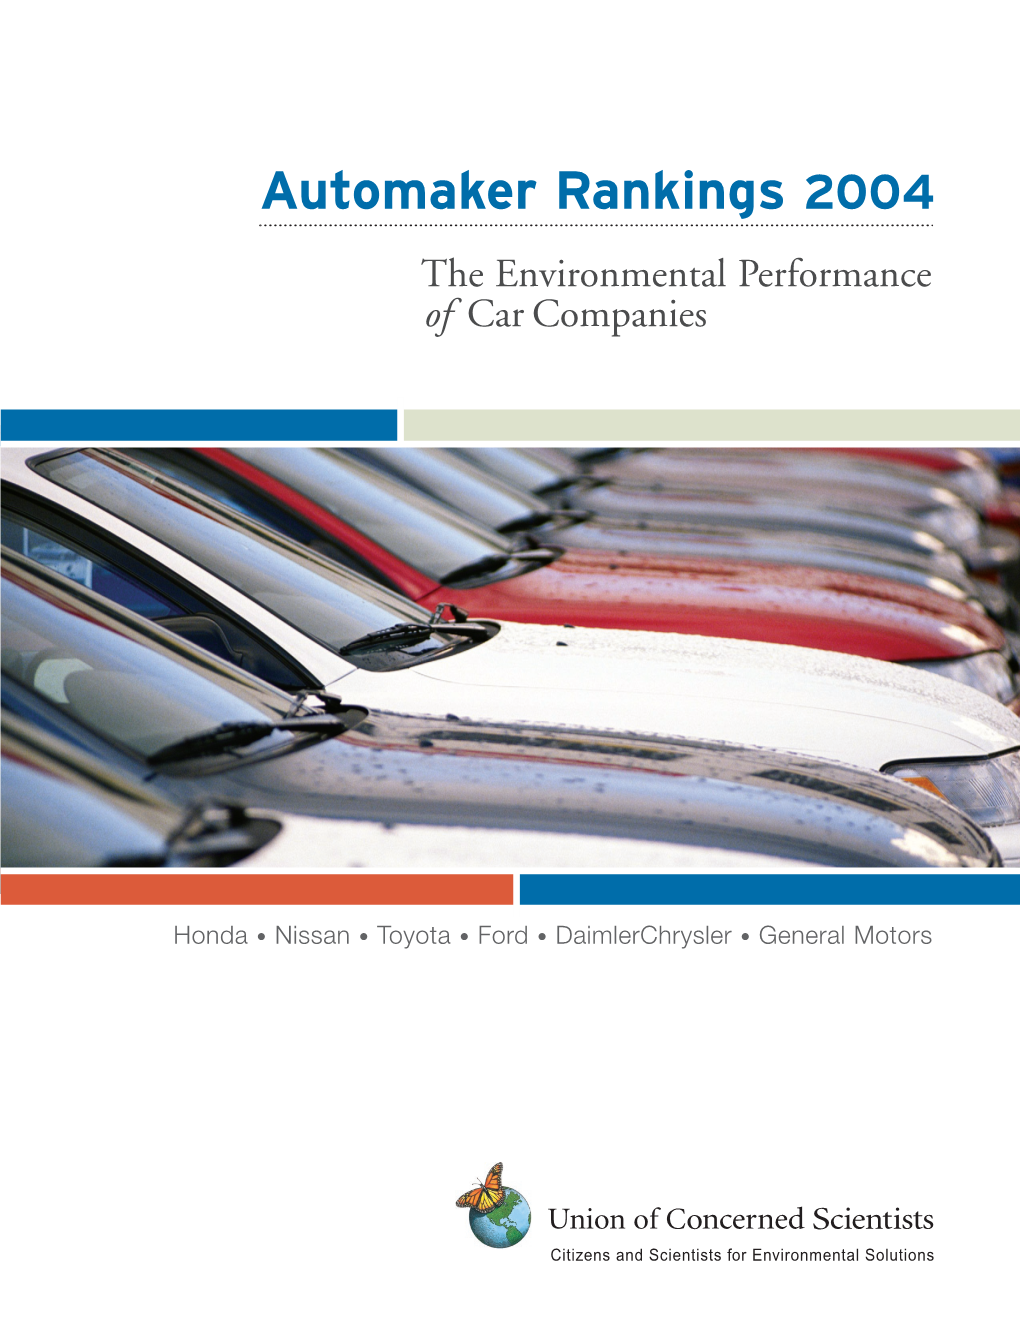 Automaker Rankings 2004 the Environmental Performance of Car Companies